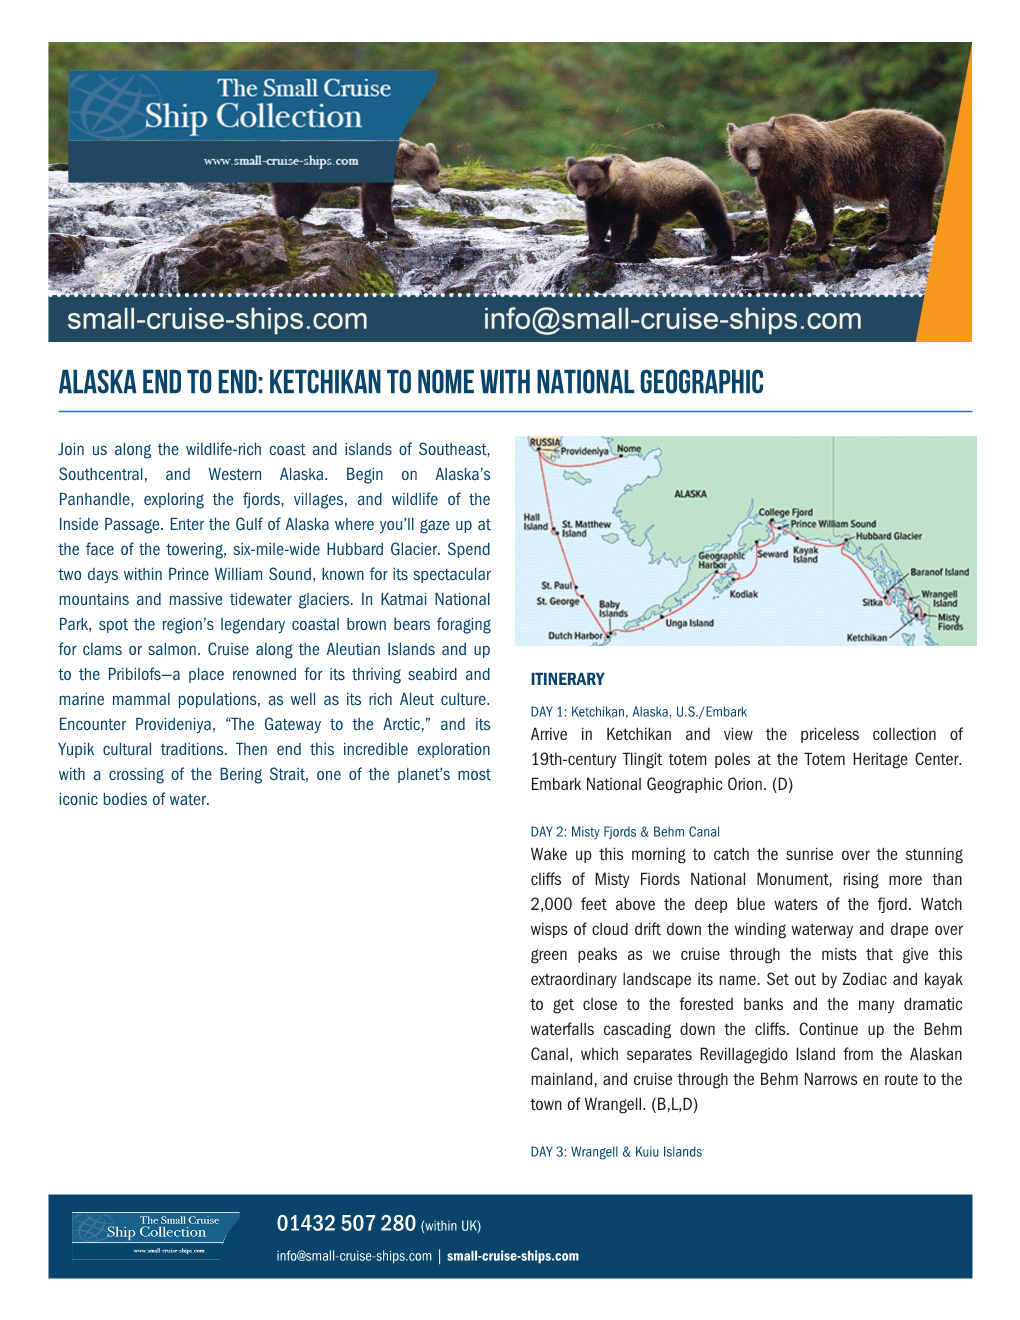 Alaska End to End: Ketchikan to Nome with National Geographic